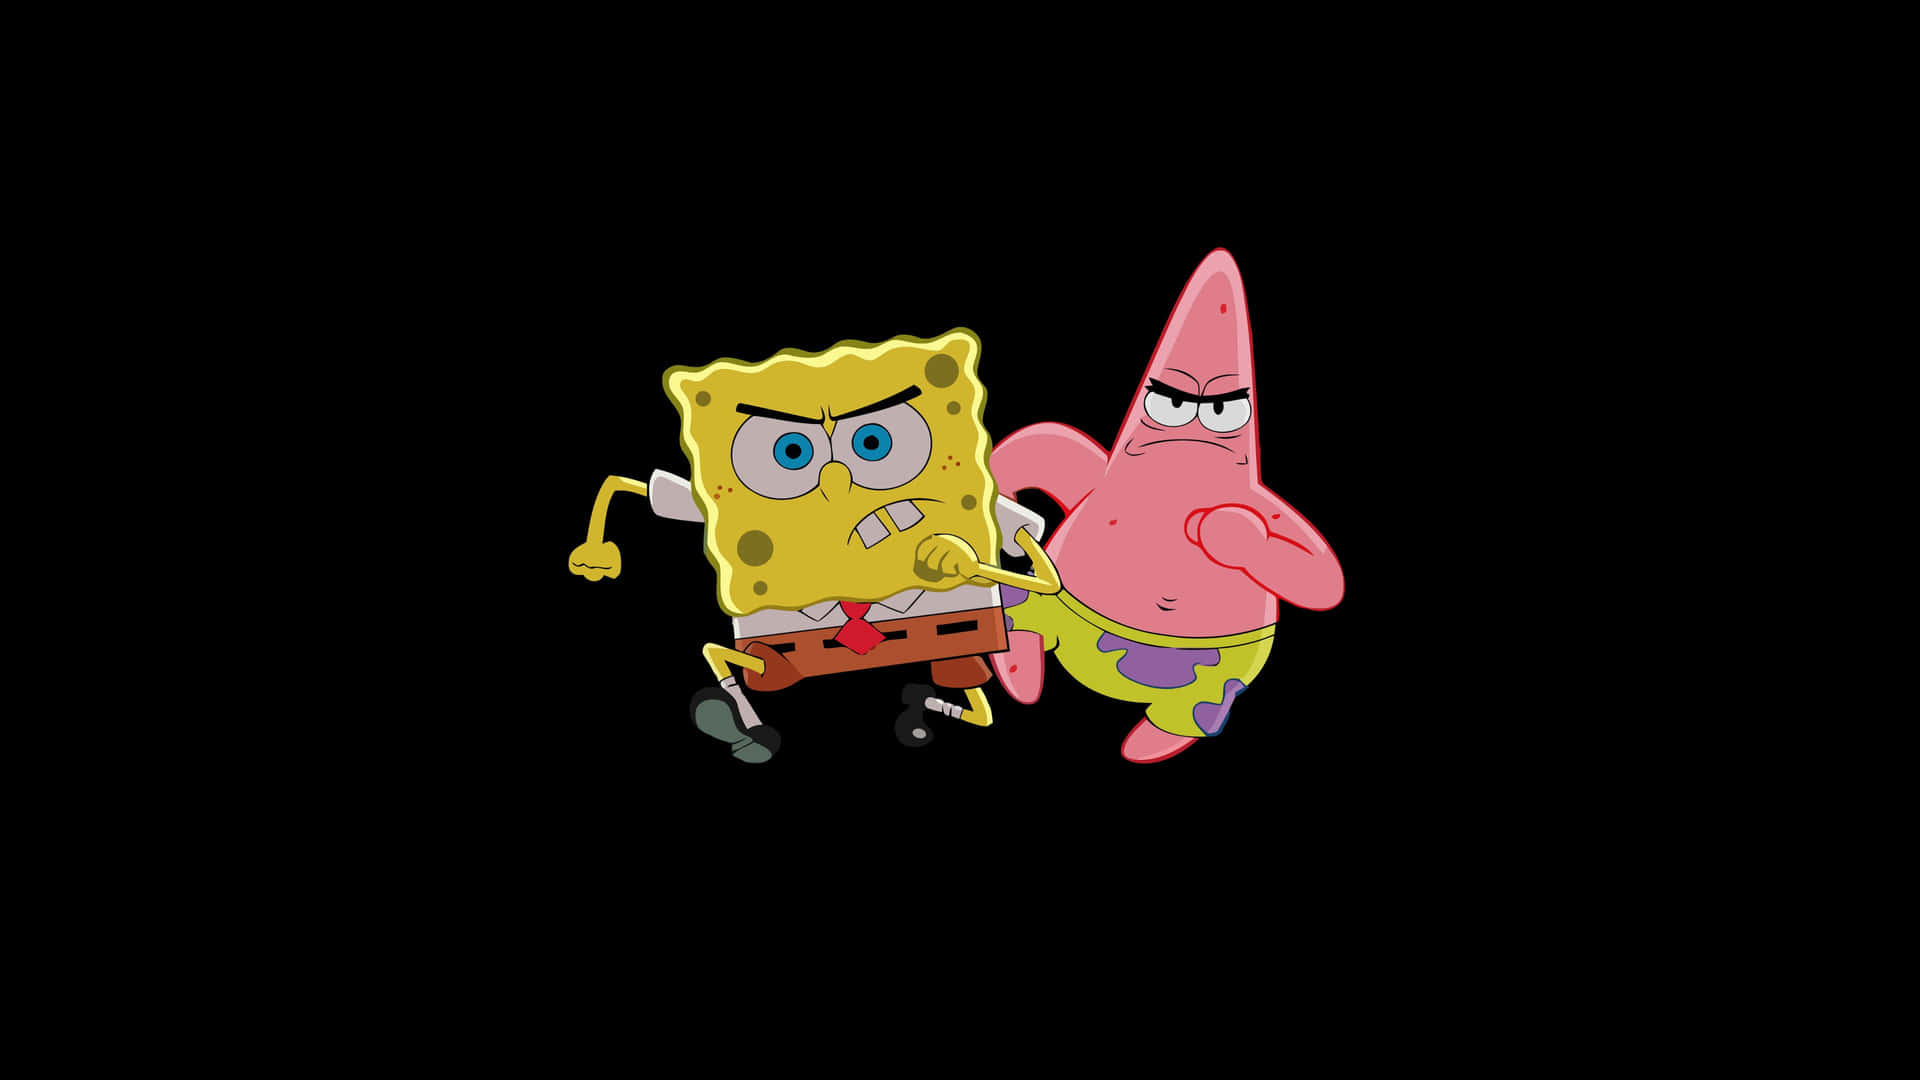 Take a look at these beloved characters from Spongebob Squarepants! Wallpaper